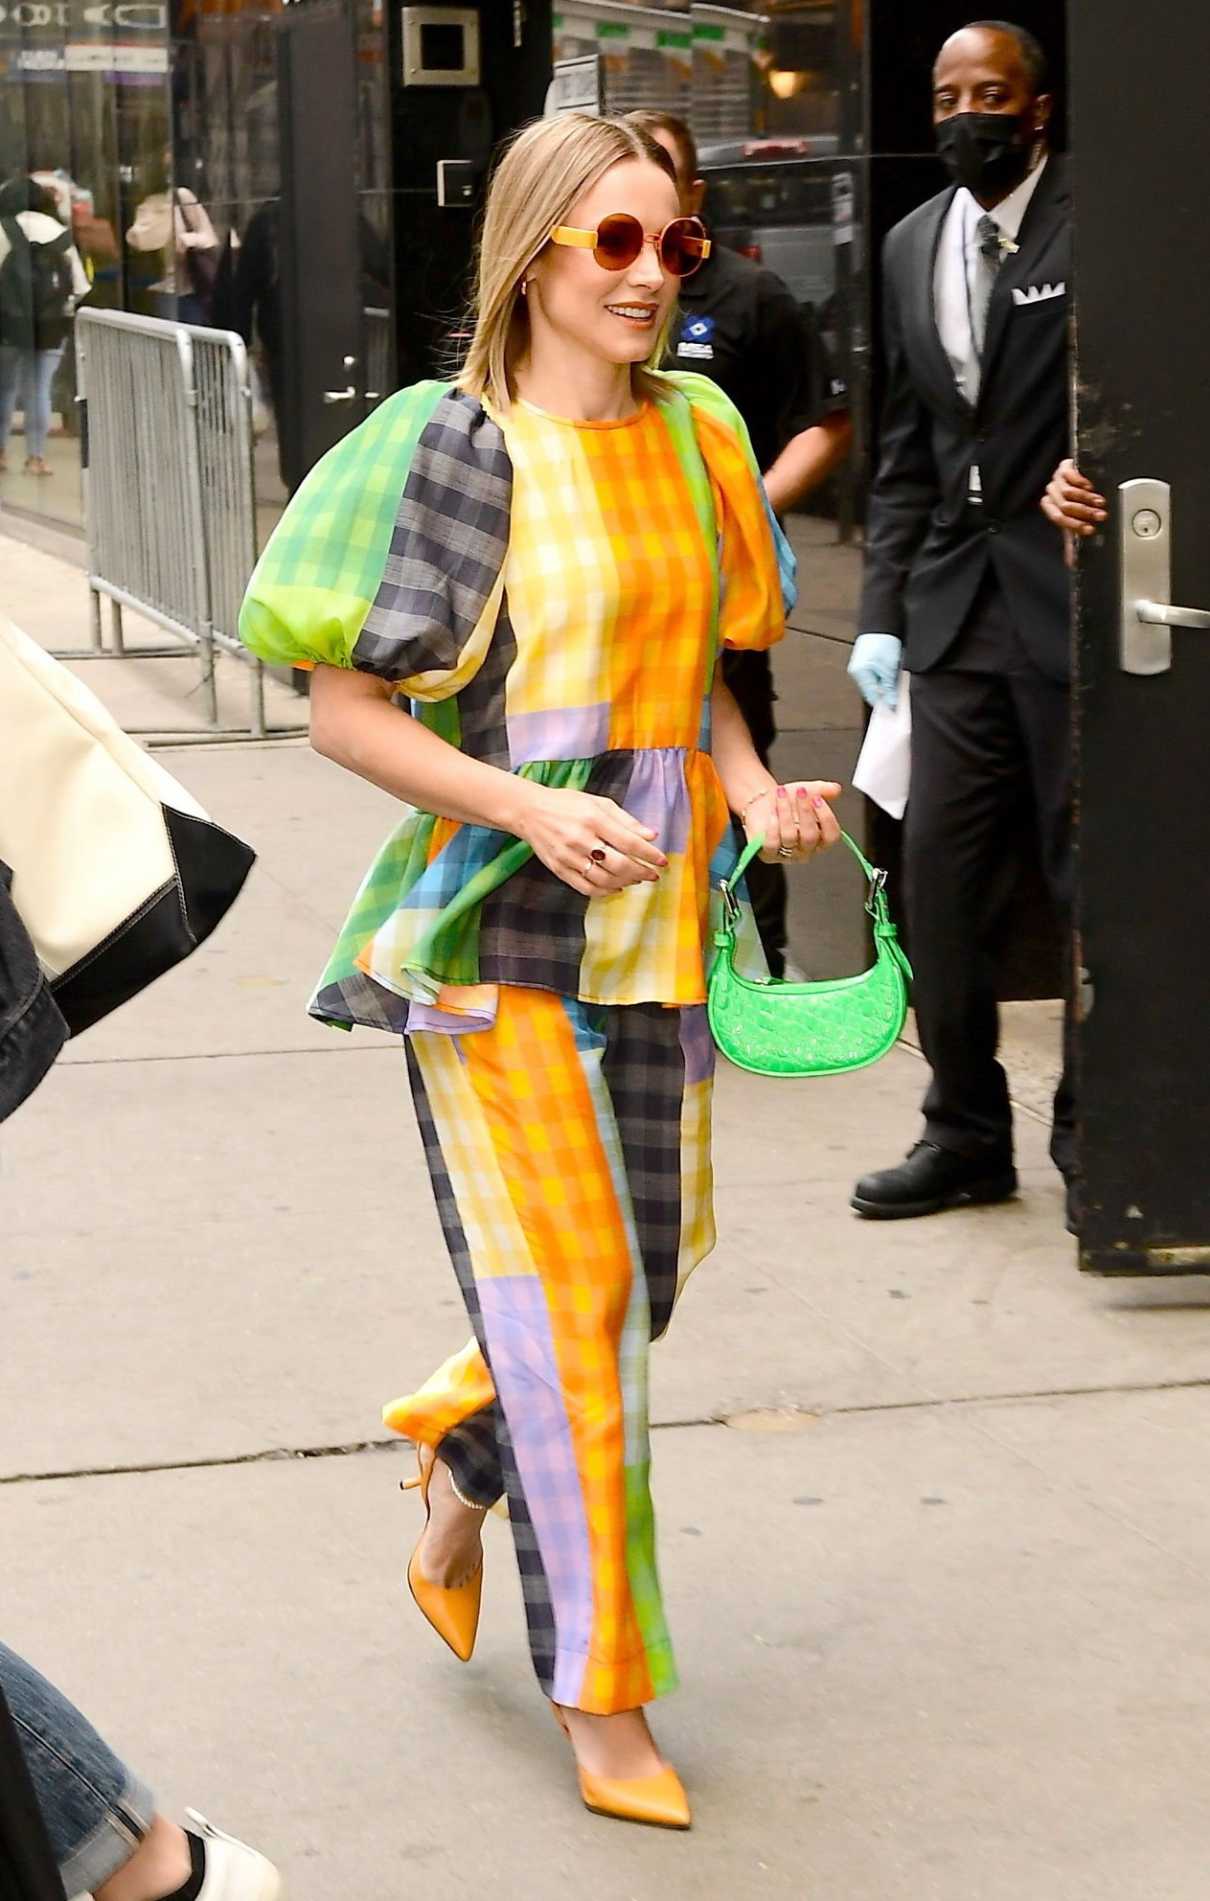 Kristen Bell in a Colorful Ensemble